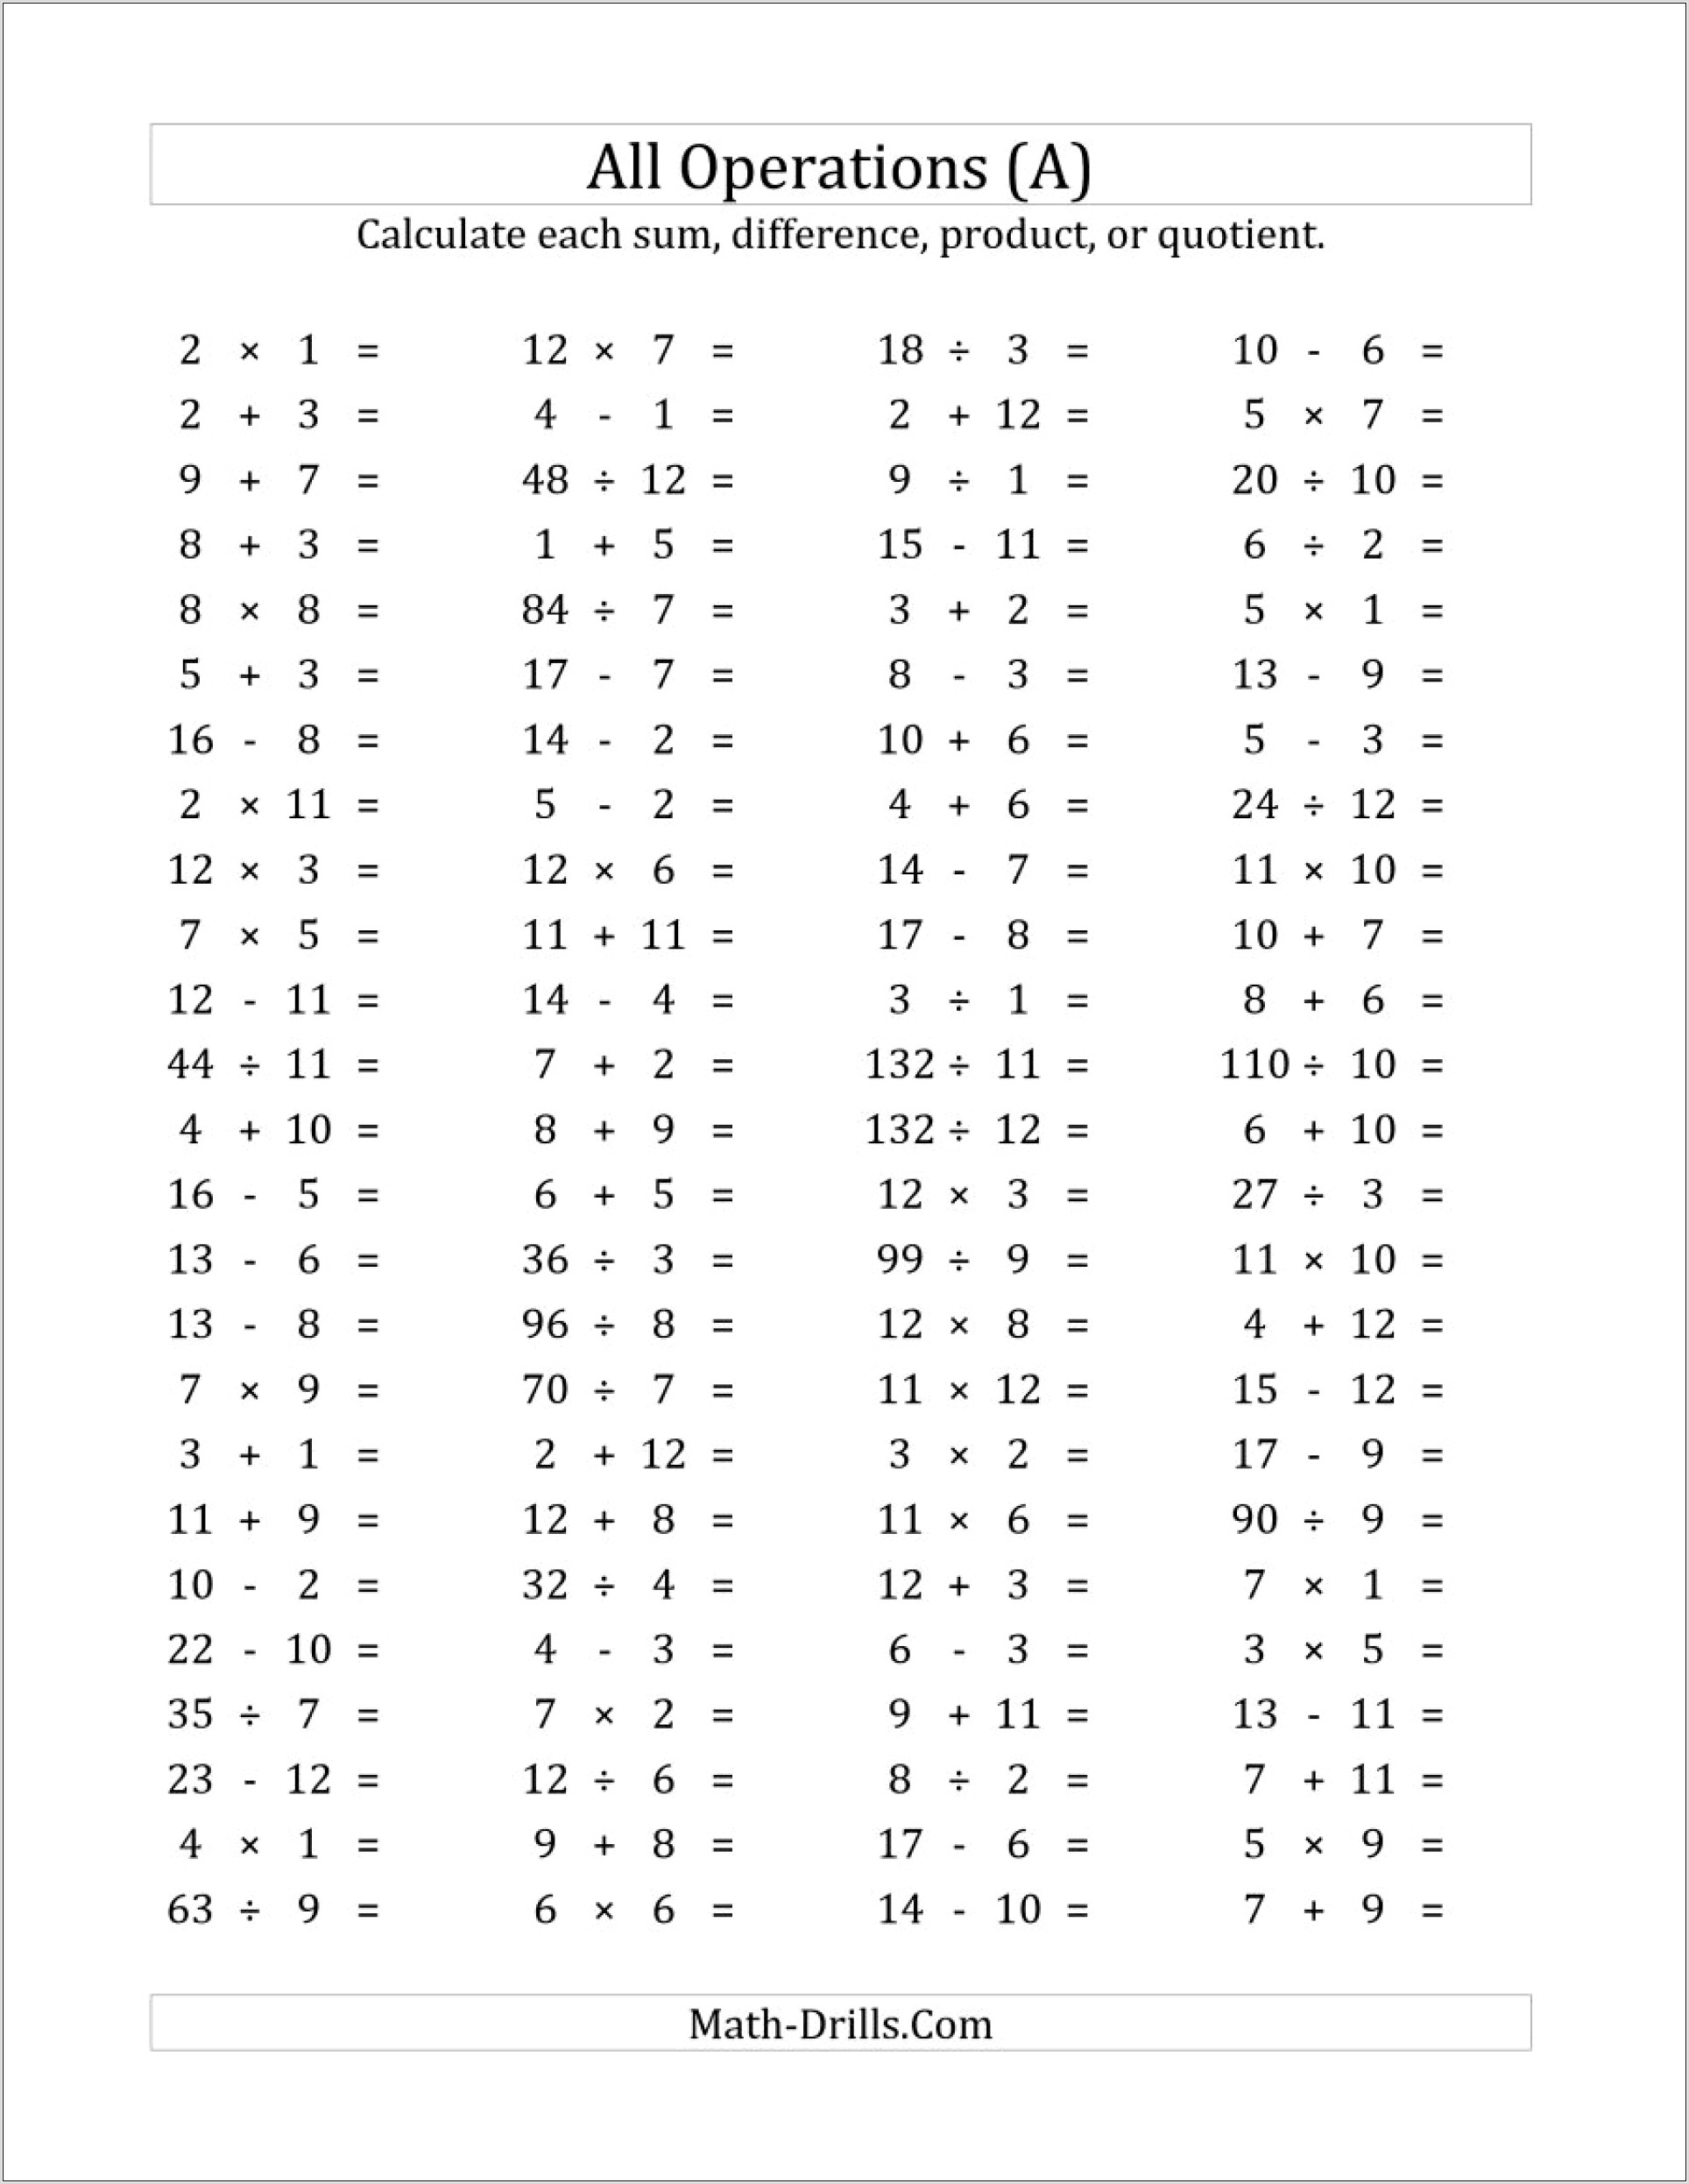 Worksheet Generator For Math Facts